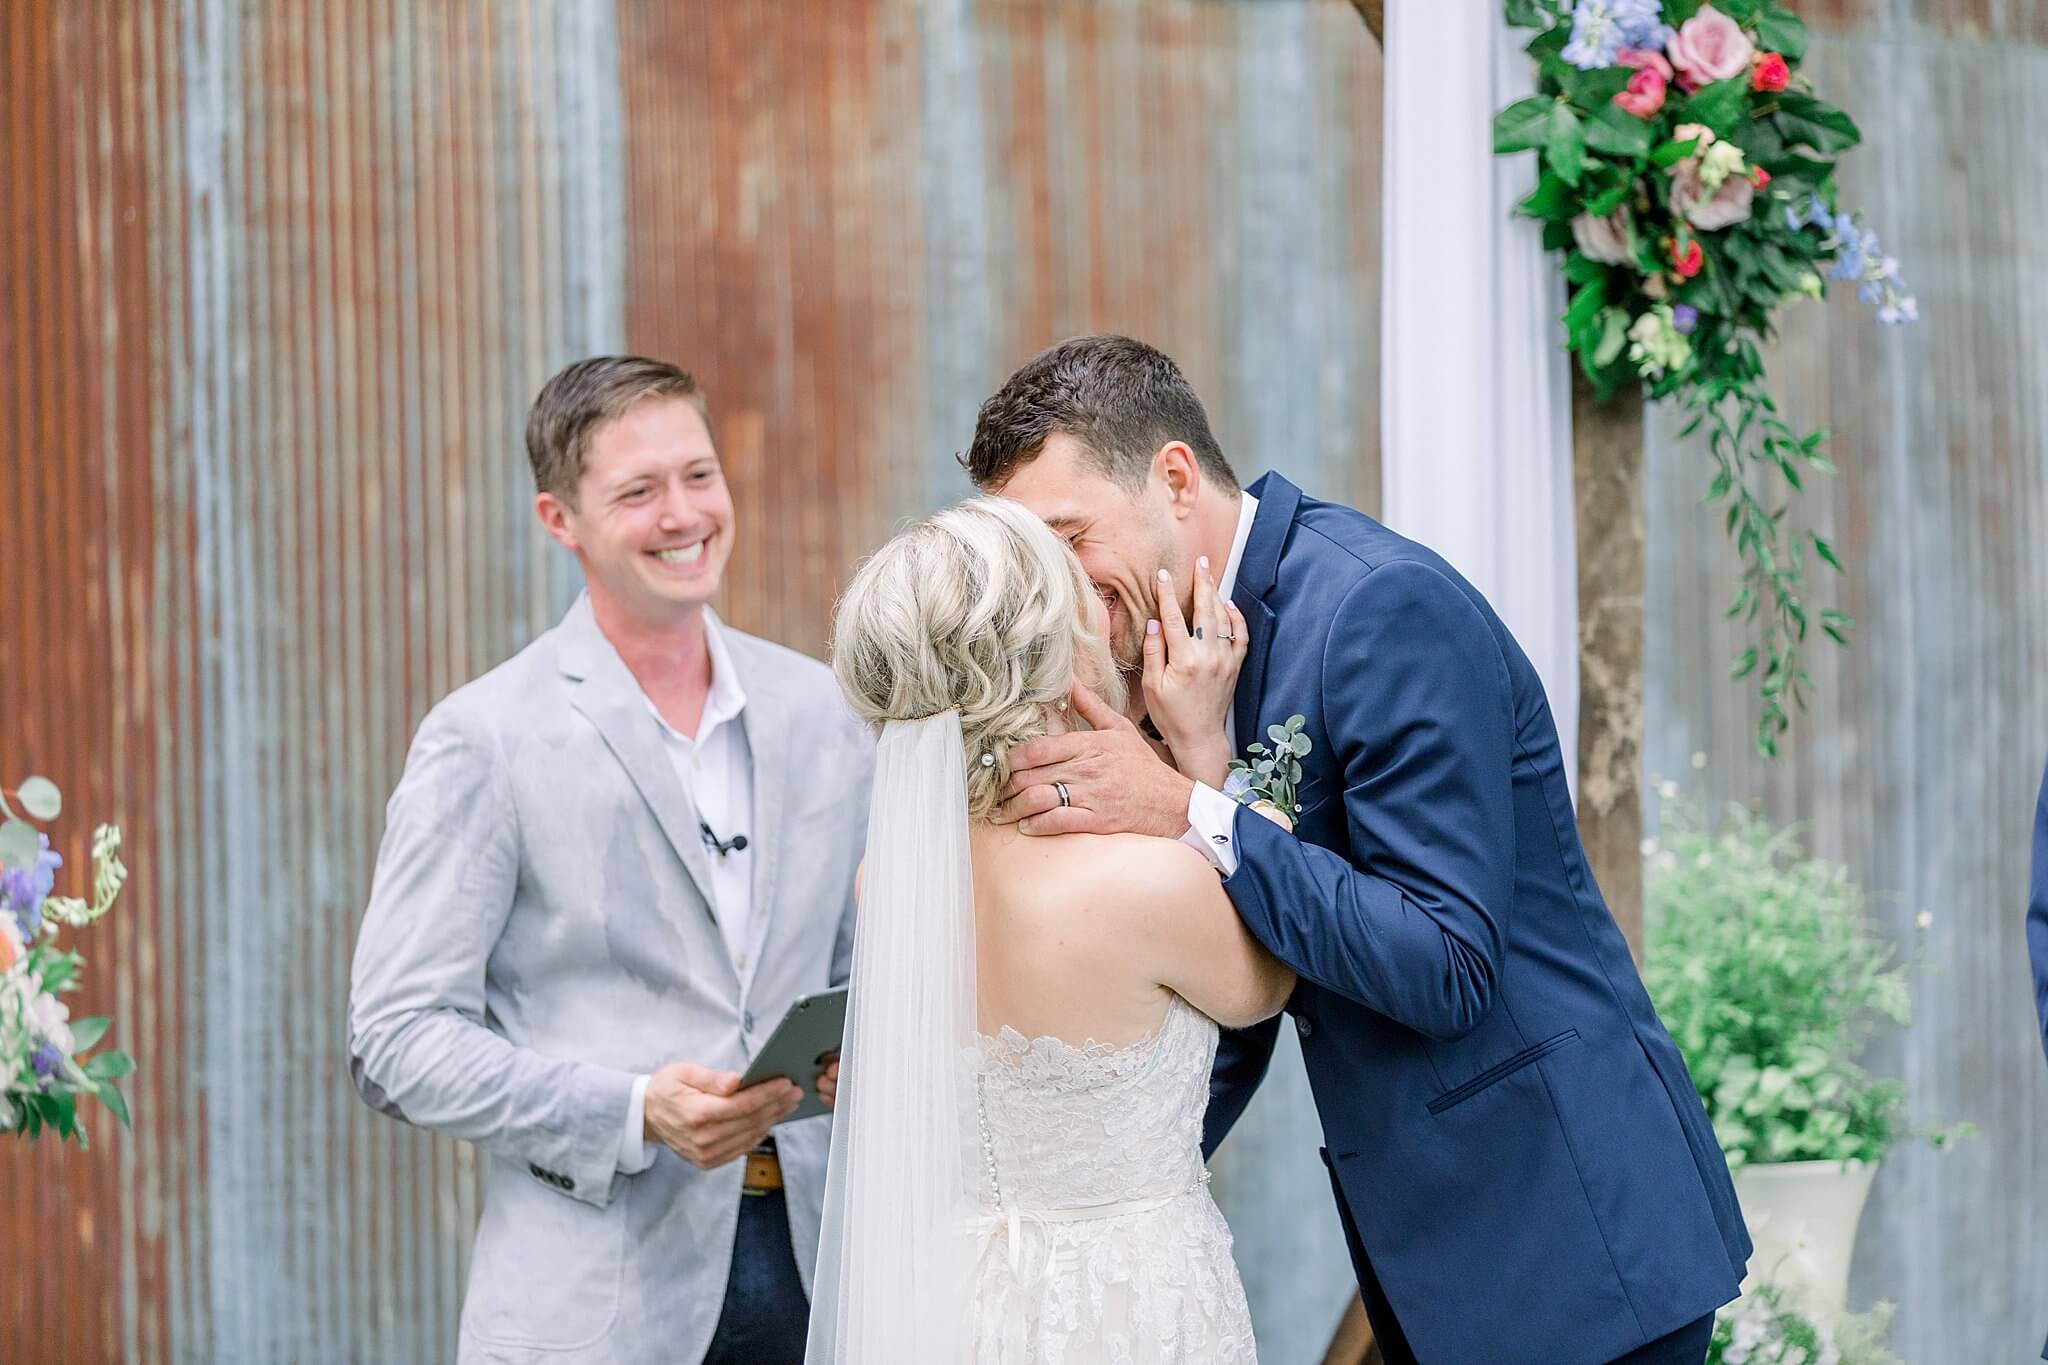 Bride and groom share first kiss during their Traverse City wedding ceremony.